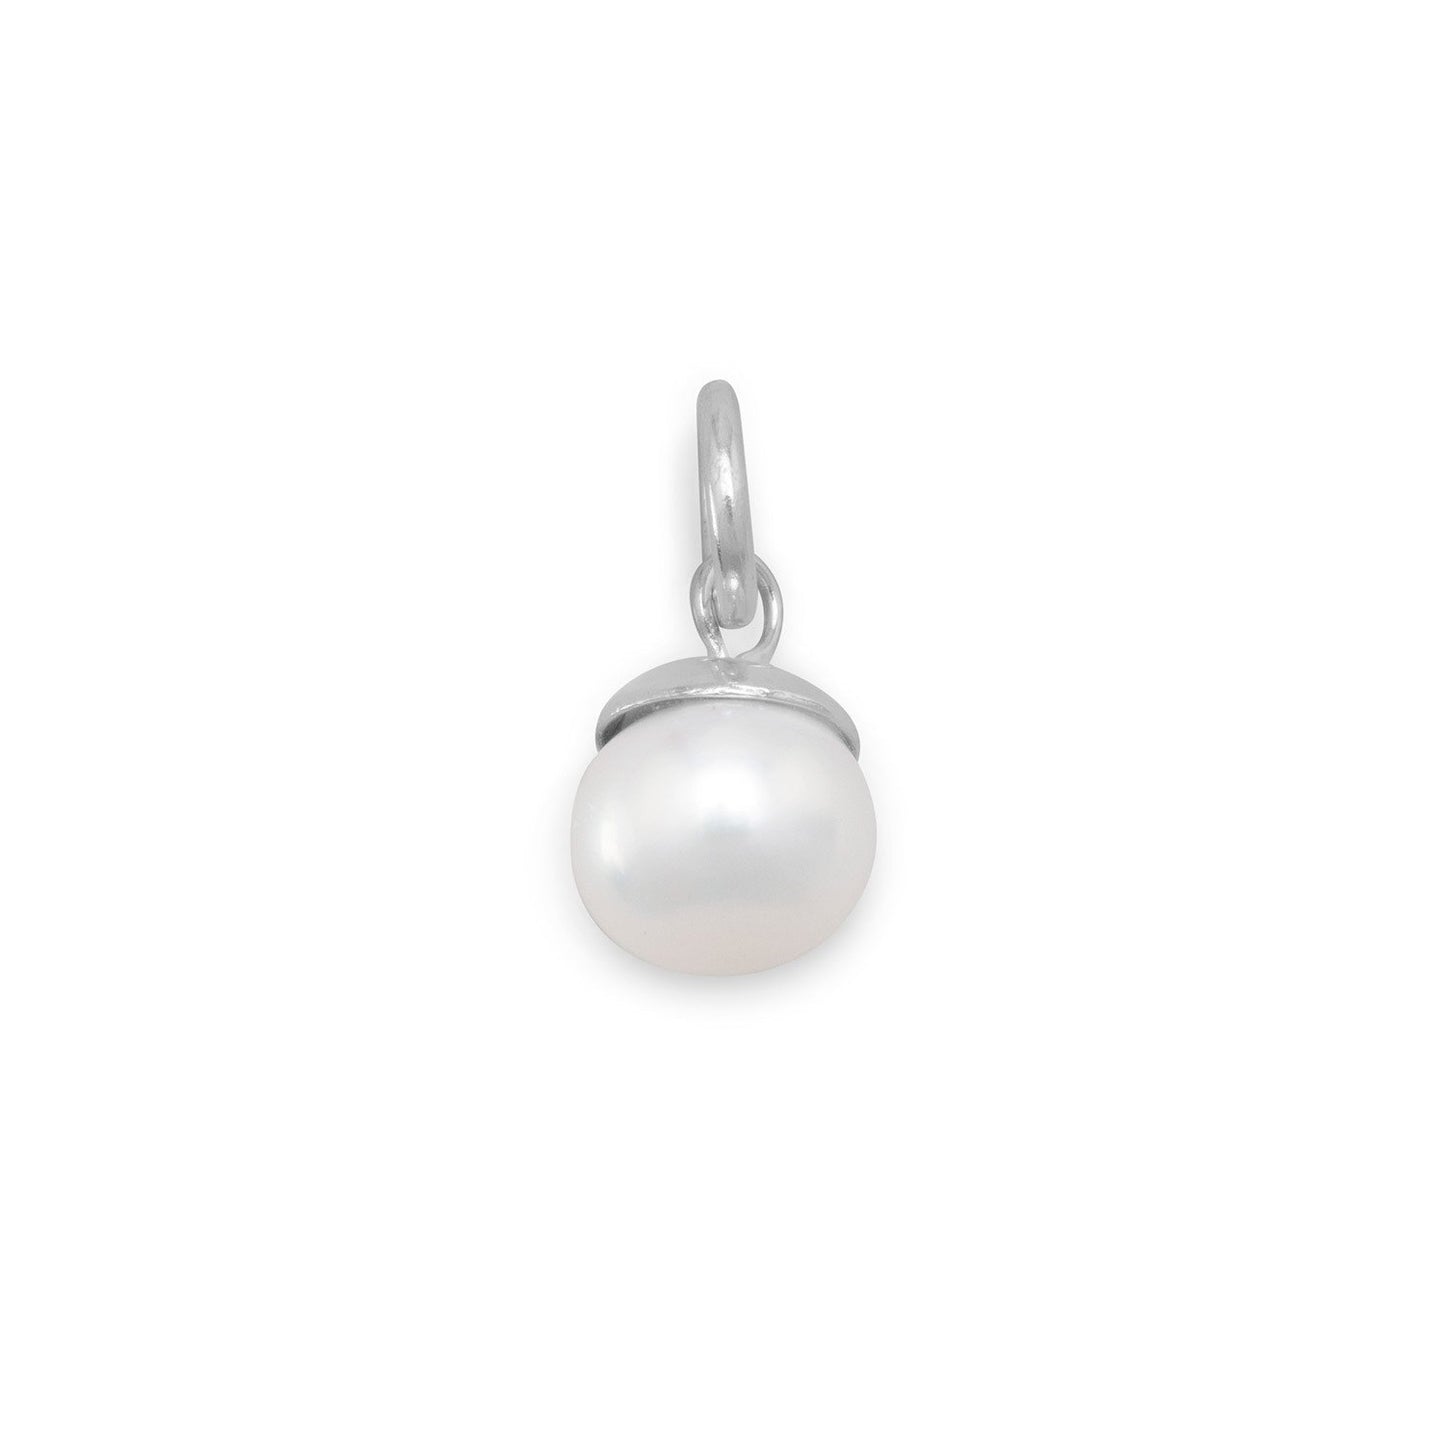 Rhodium Plated Cultured Freshwater Pearl Bracelet Charm Bead